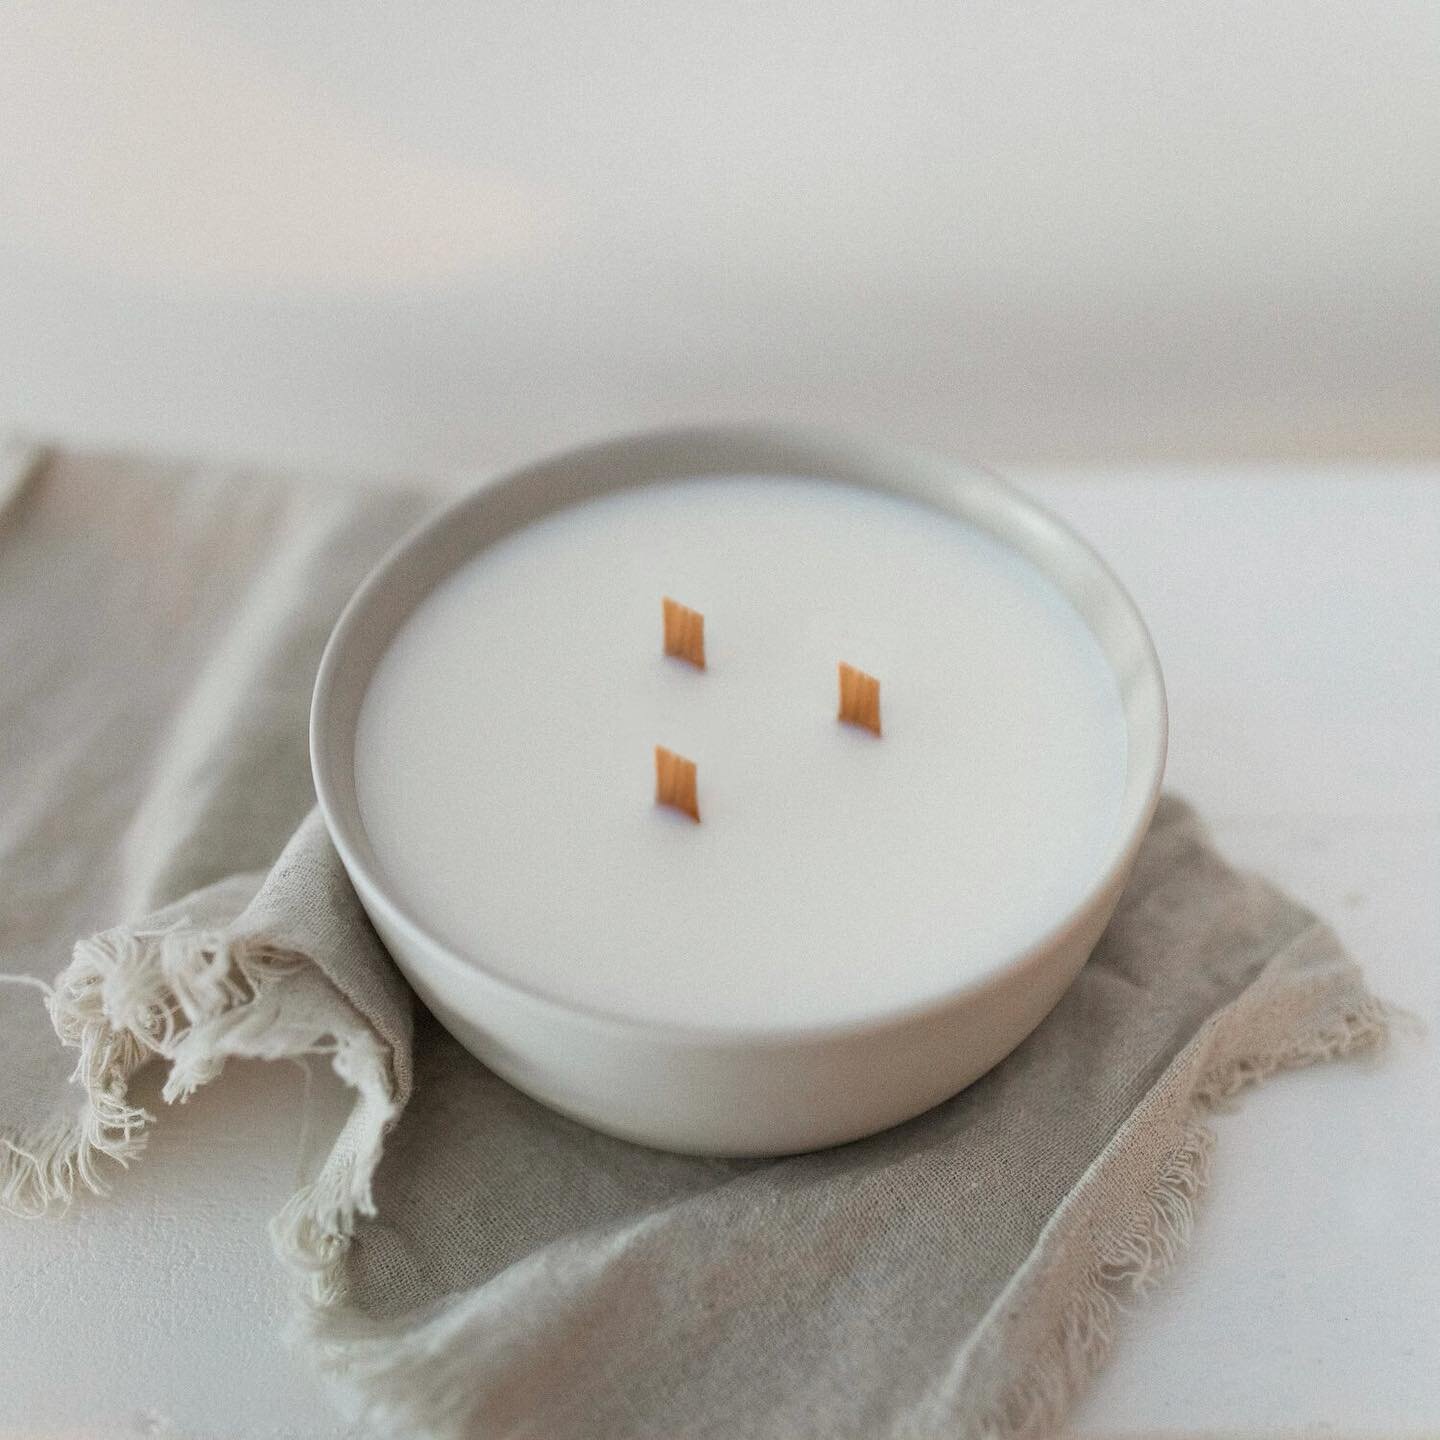 O N E  W E E K !

We&rsquo;re so excited about all the scents in our Spring collection! This Fresh Linen soy candle is big, beautiful, and smells A-M-A-Z-I-N-G 🤍 Tell us what you think of this style in the comments below!